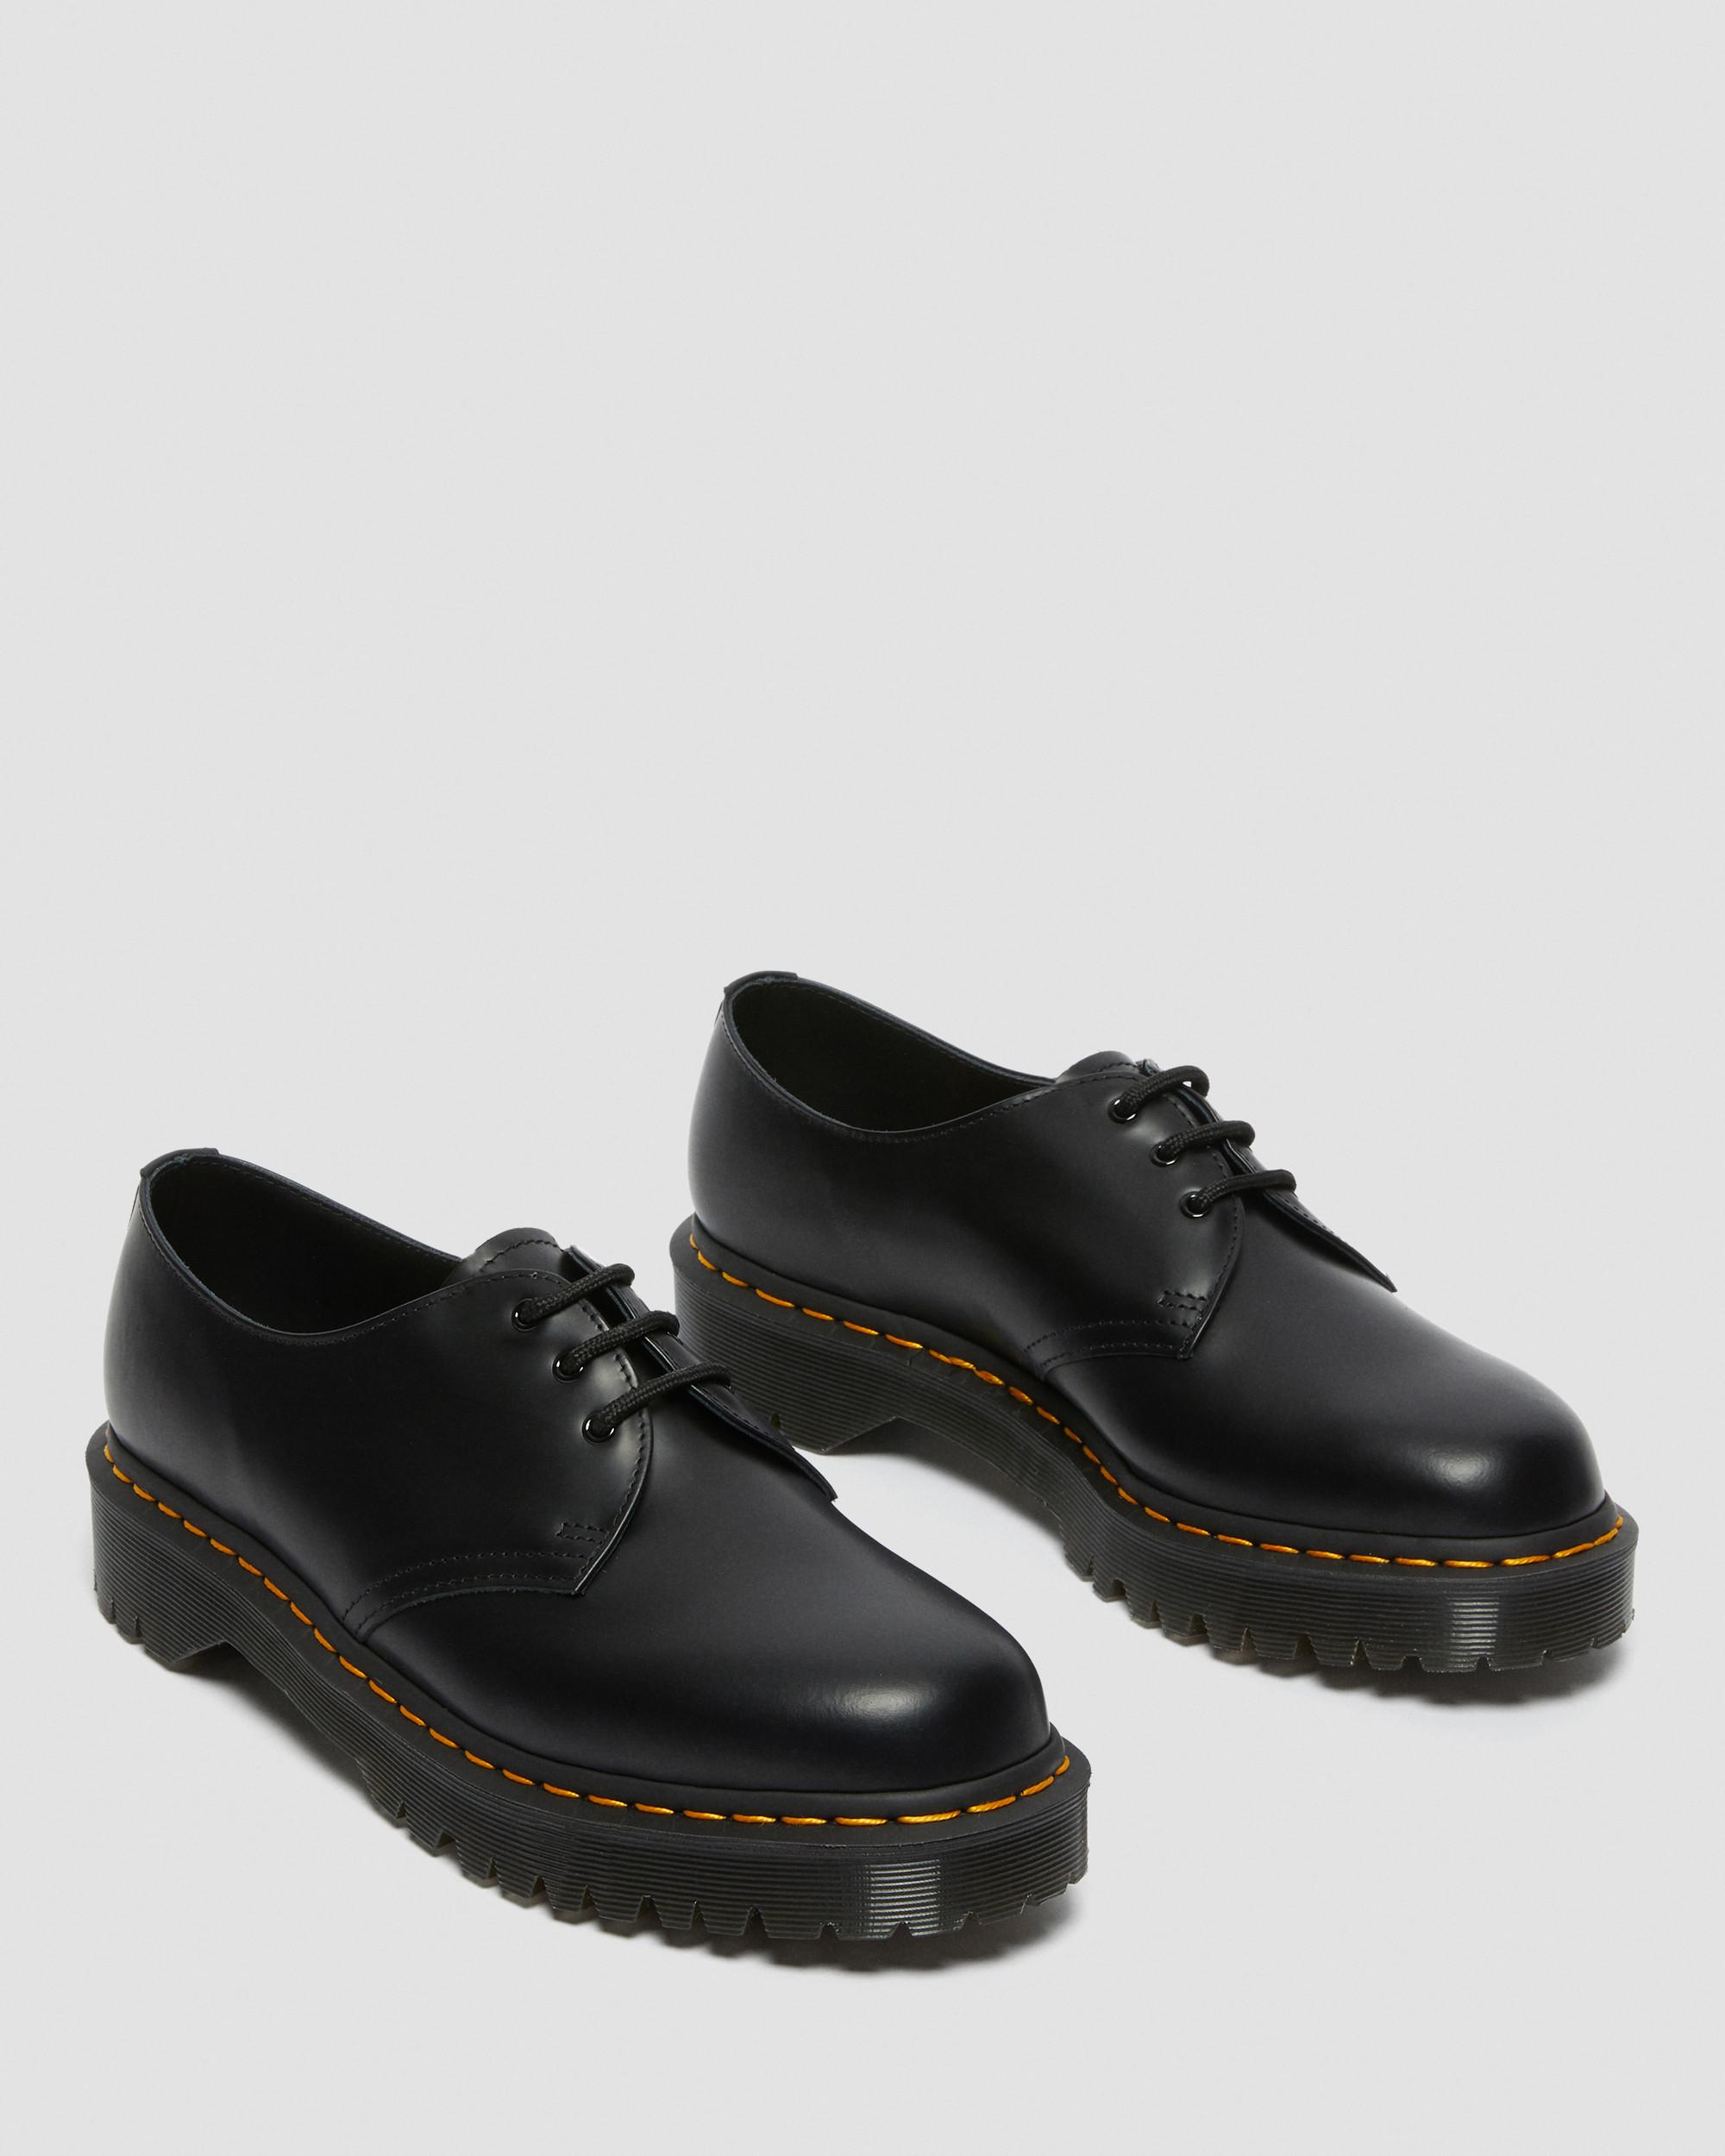 DR MARTENS 1461 Bex Smooth Leather Oxford Shoes